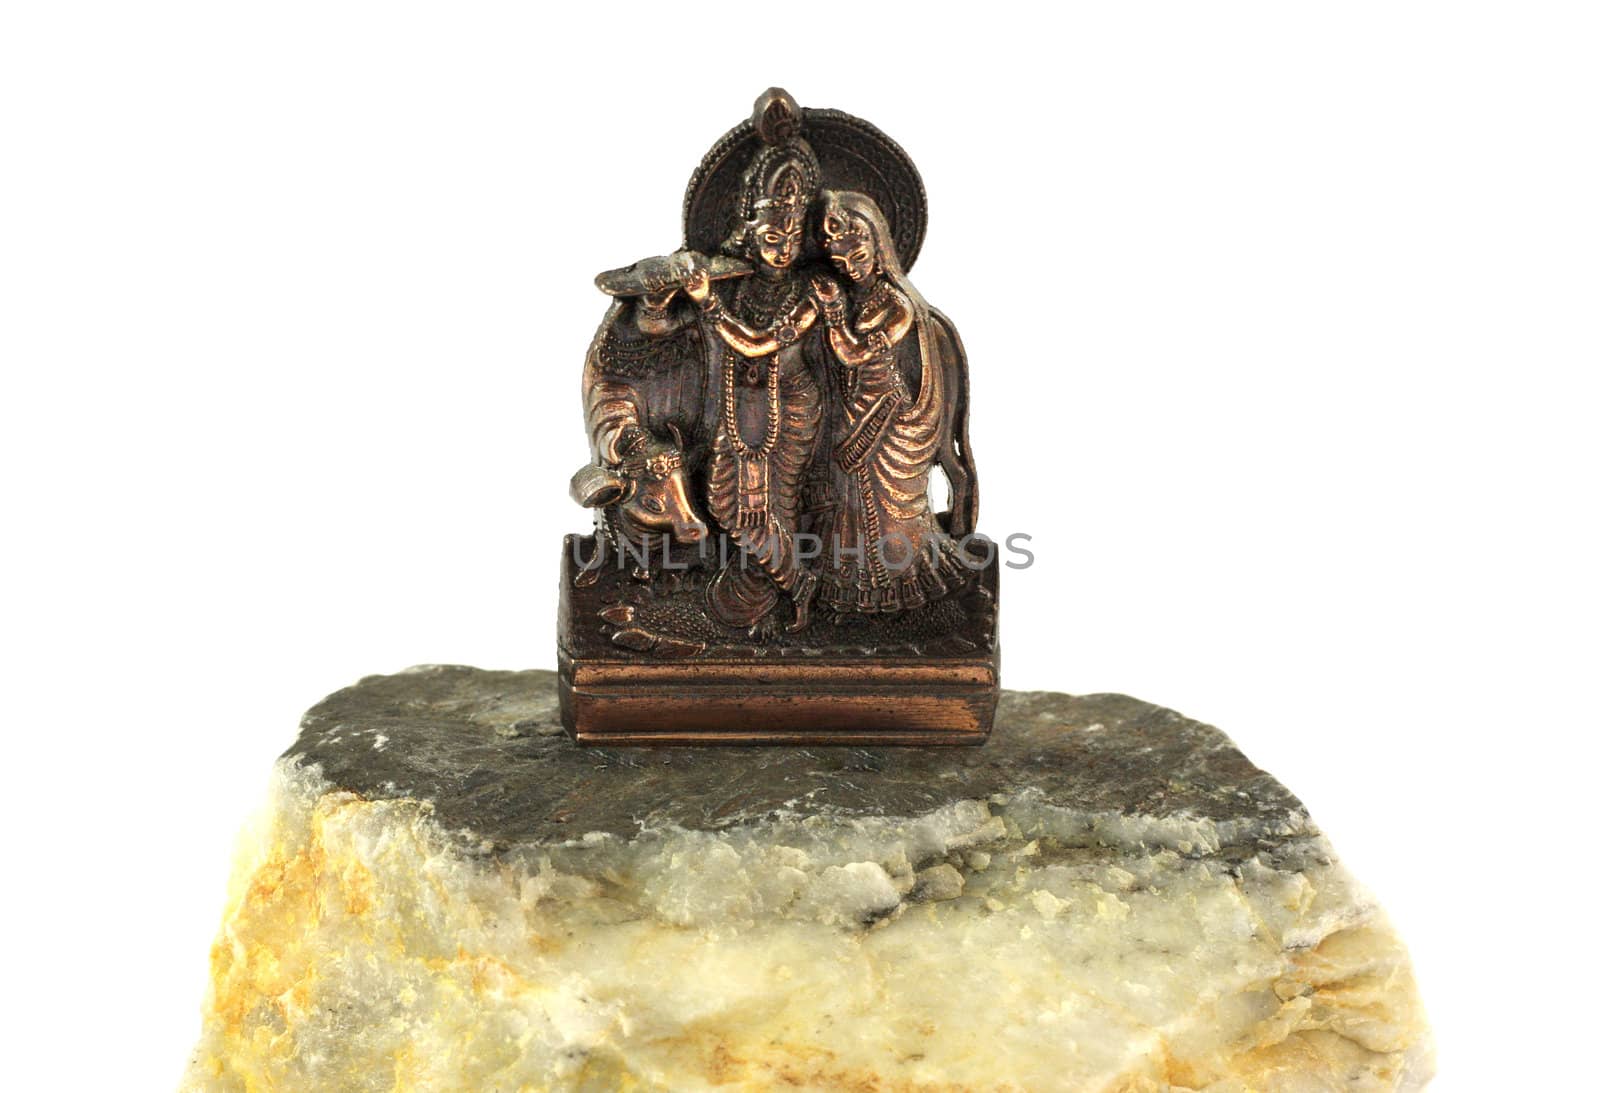 Bronze sculpture of indian deity ''krishna'' that is worshiped across many traditions of Hinduism. He is usually depicted as a young cowherd boy playing a flute.